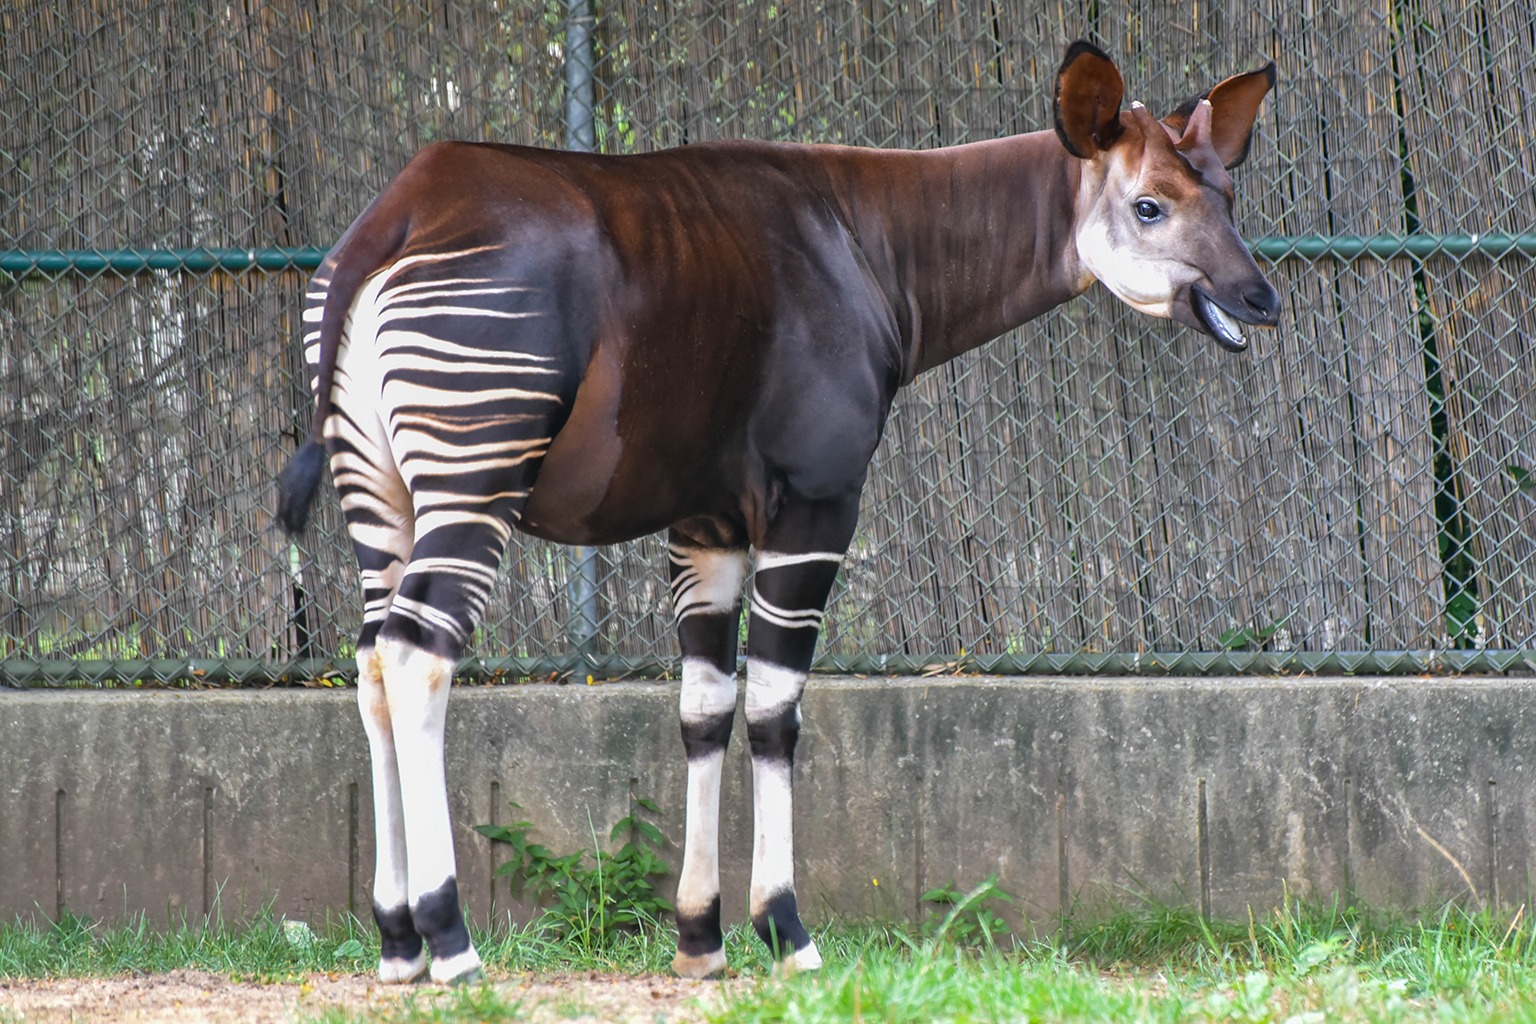 What has long legs, stripes and lives at the zoo?